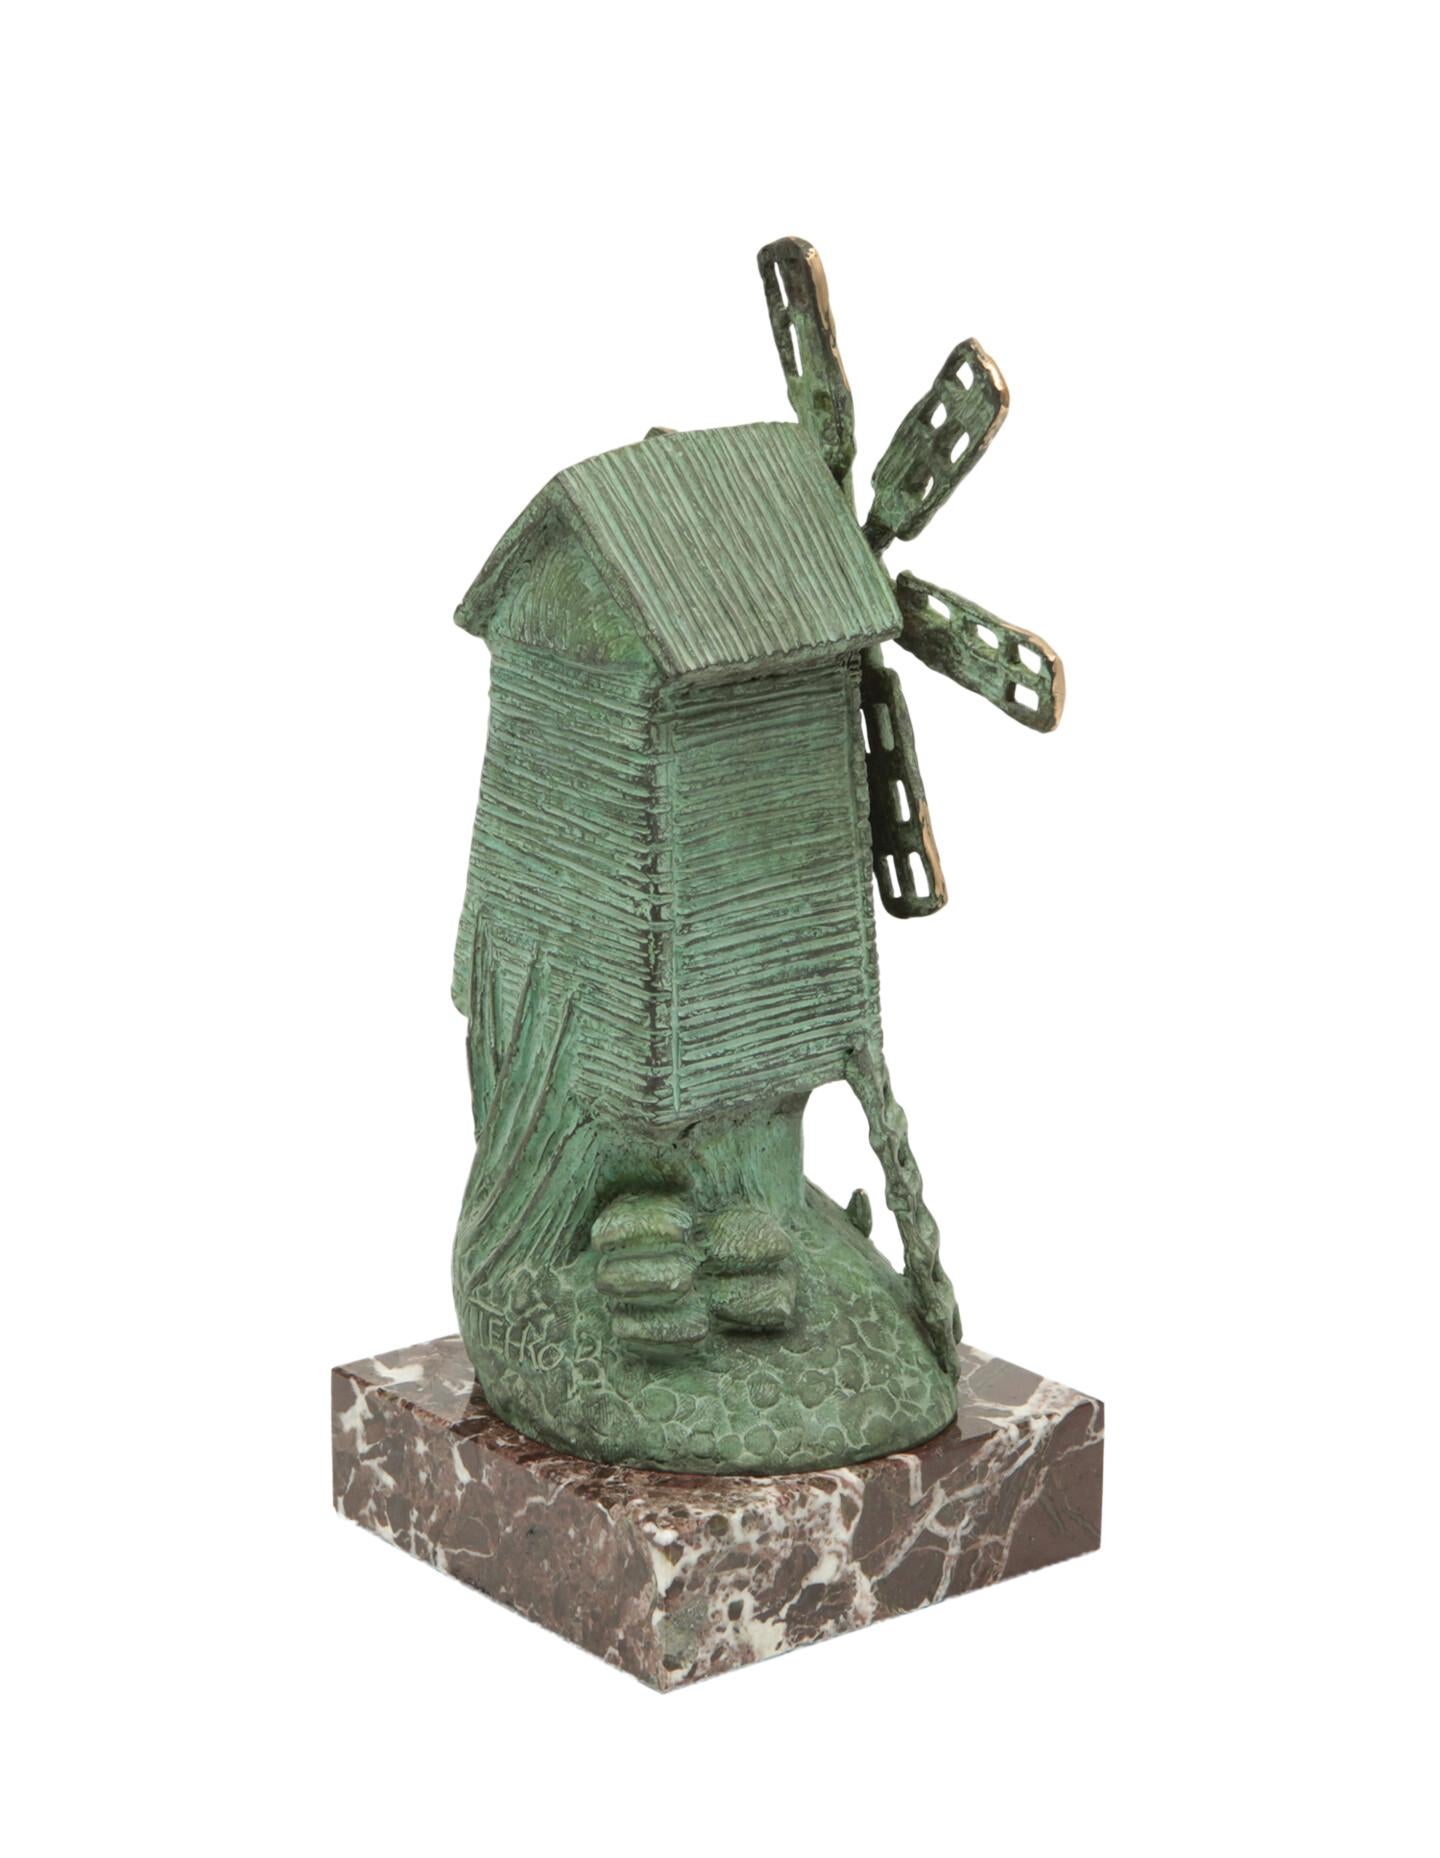 National Traditions 2, Bronze Sculpture by Volodymyr Mykytenko, 2012 For Sale 2